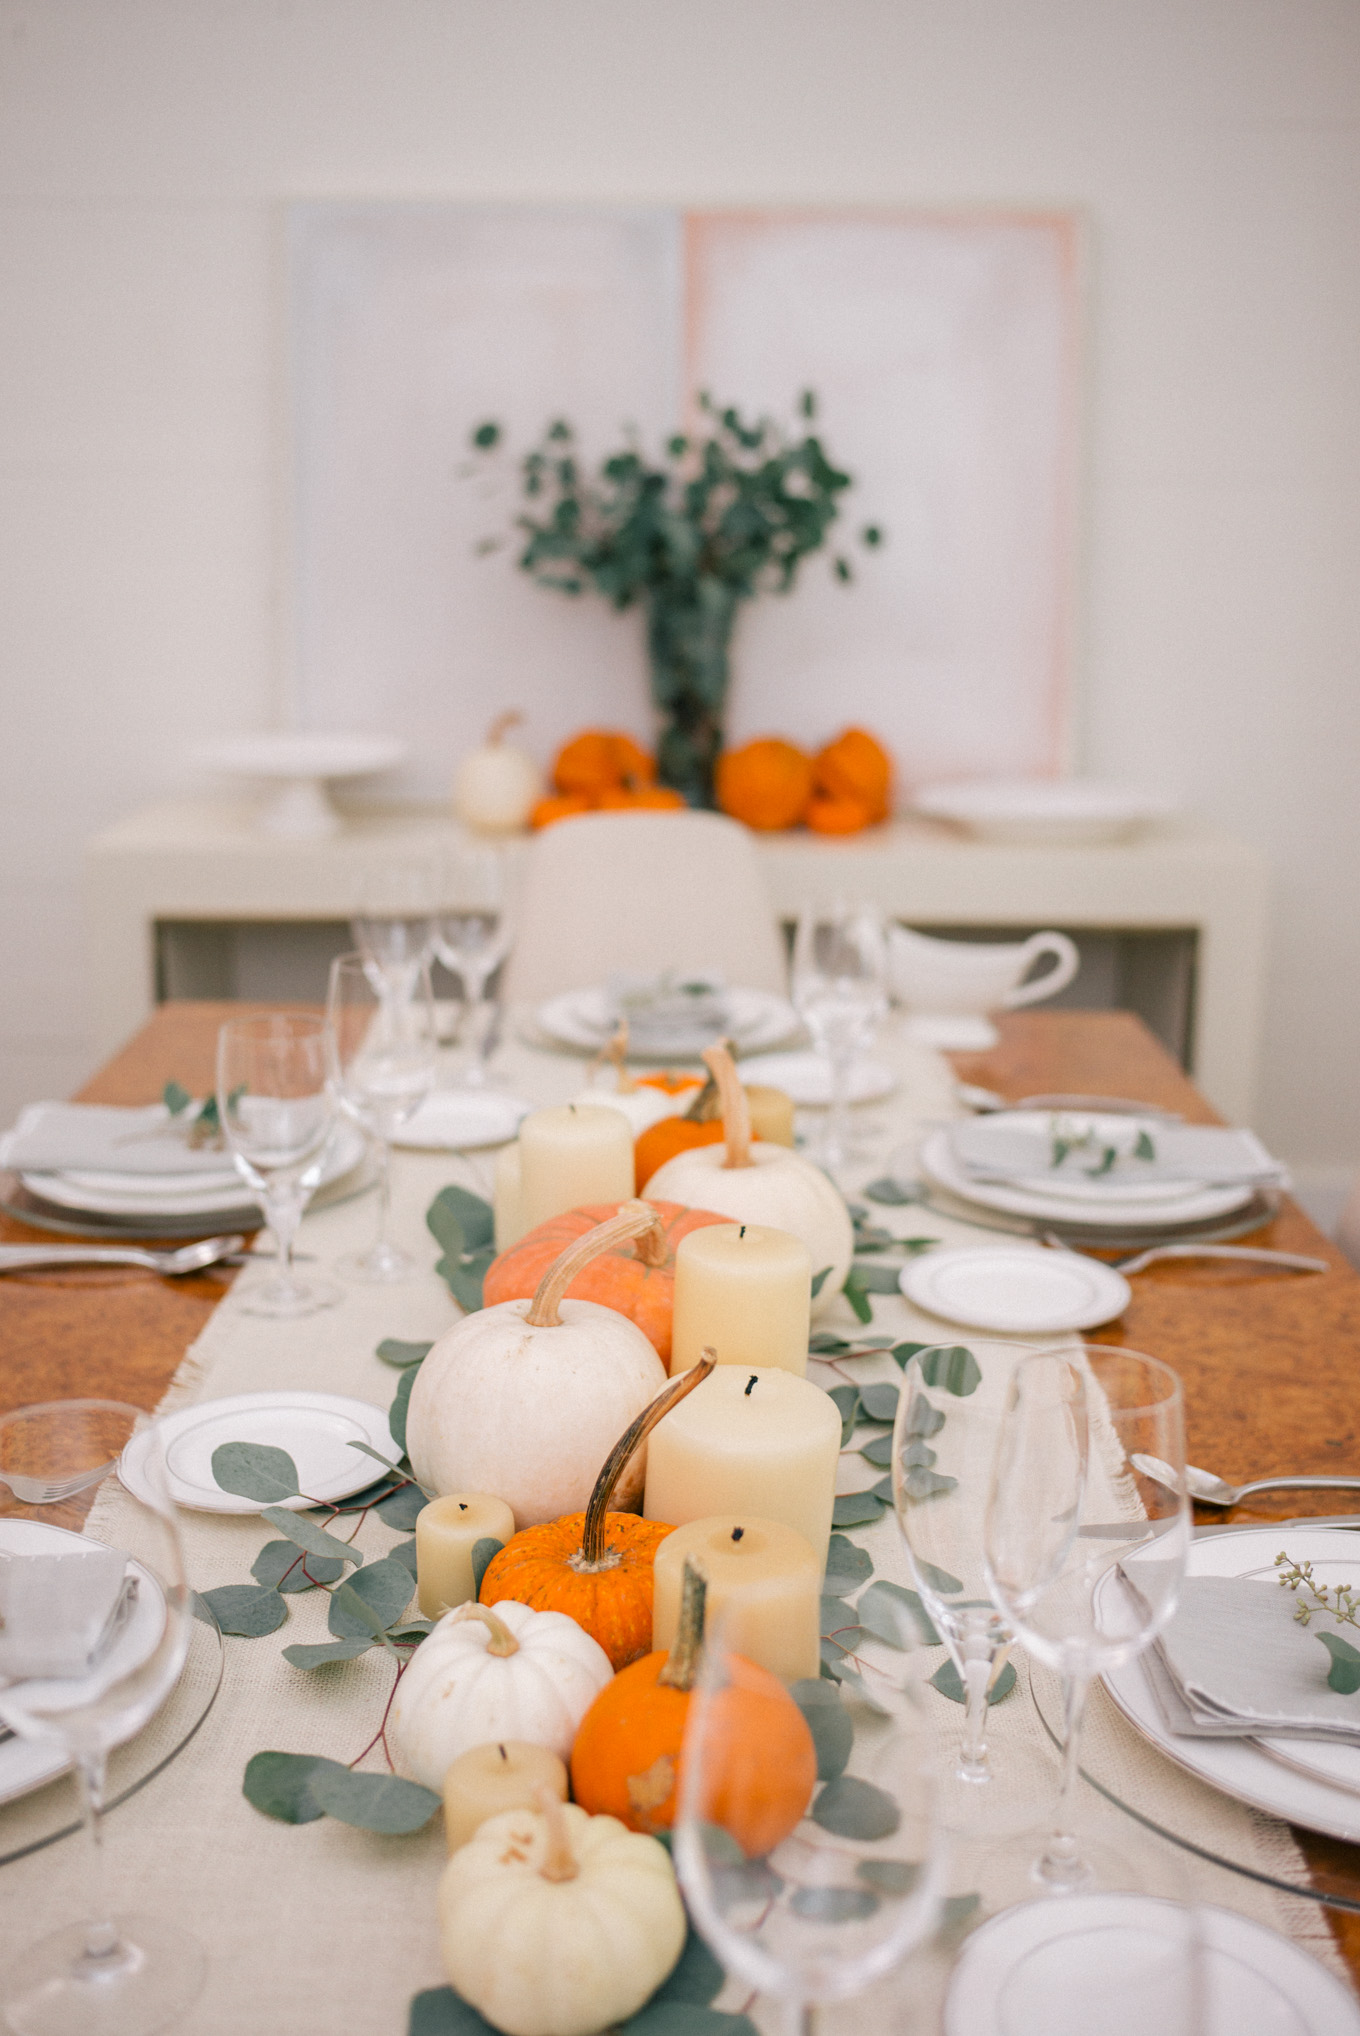 gmg-thanksgiving-table-1003310-1